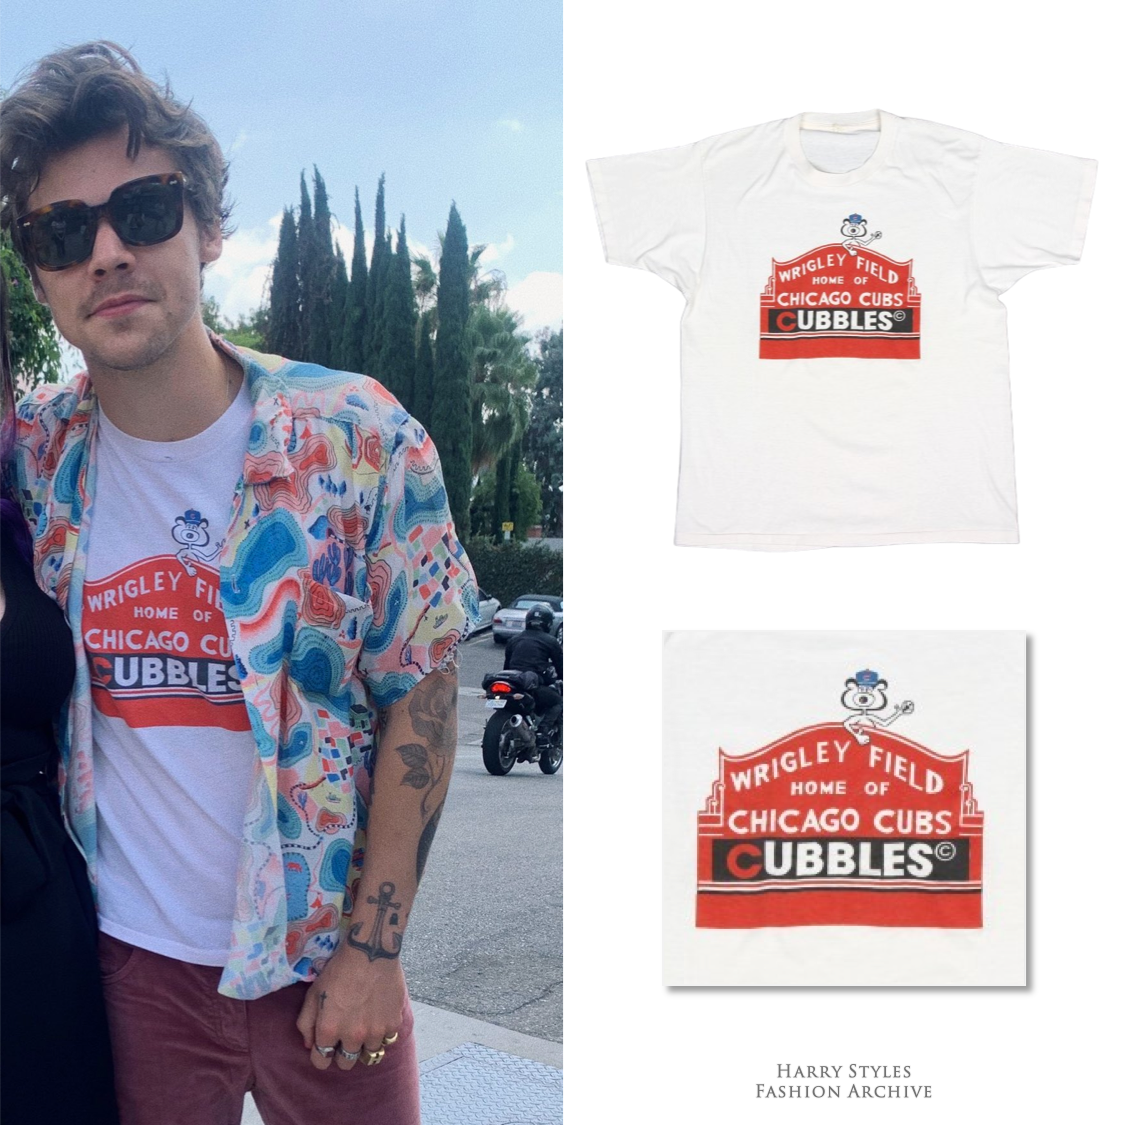 Harry Styles Fashion Archive on X: Harry wore a vintage @Yankees